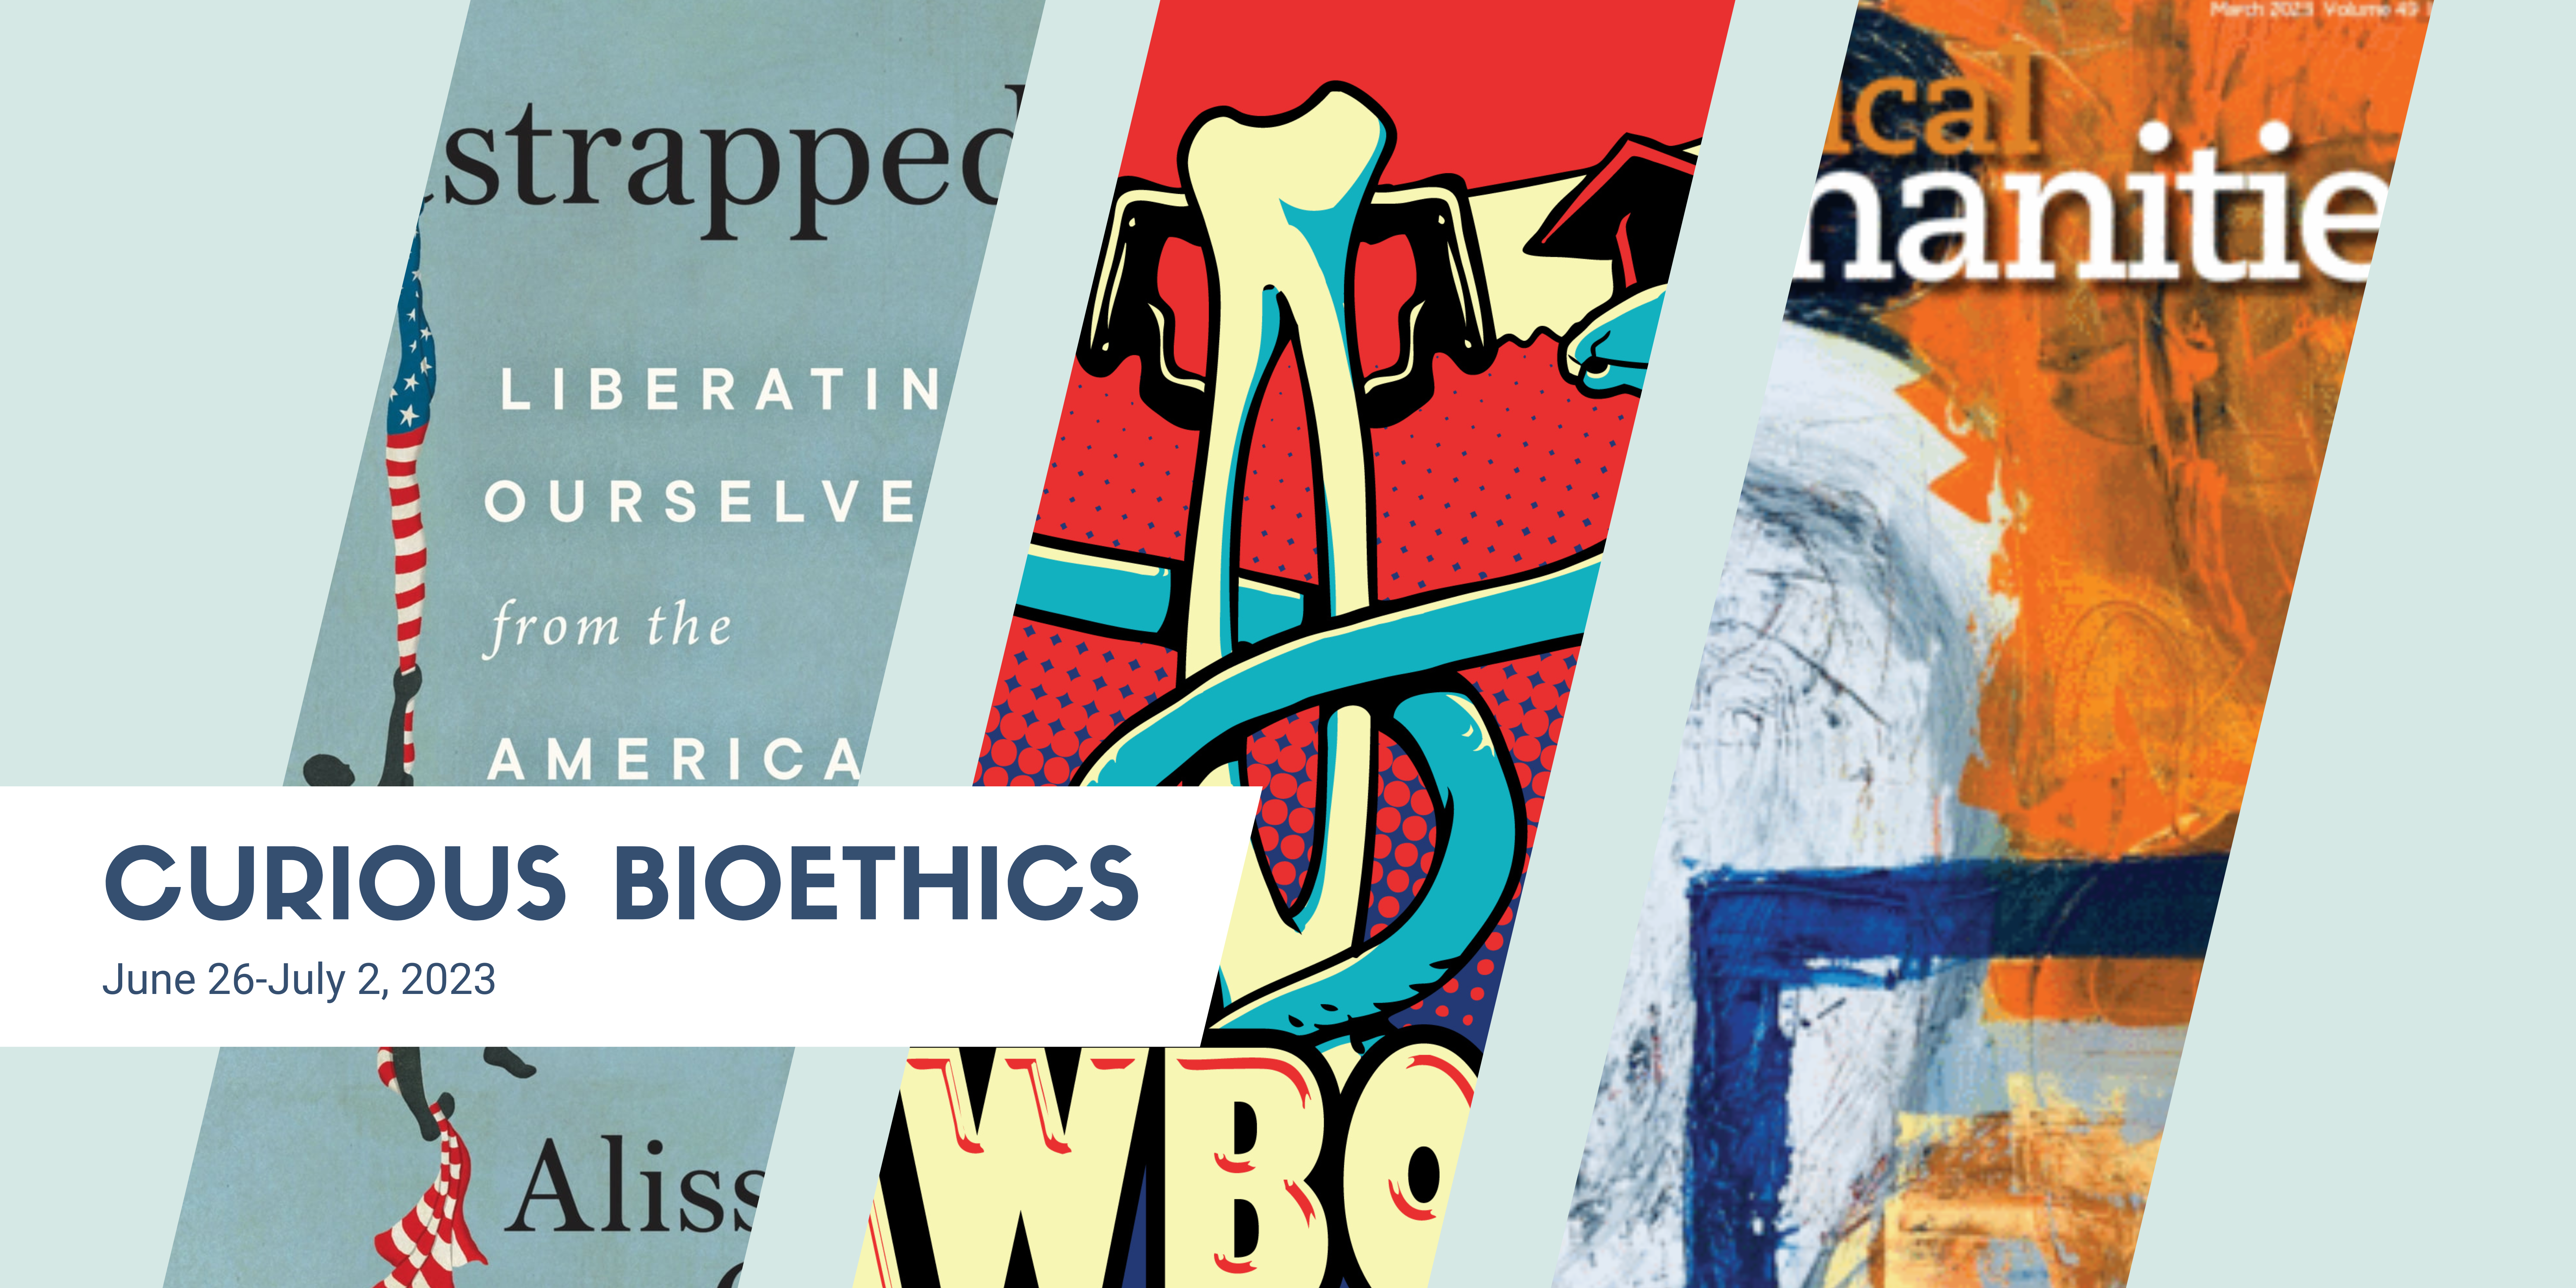 Curious Bioethics: June 26-July 2, 2023